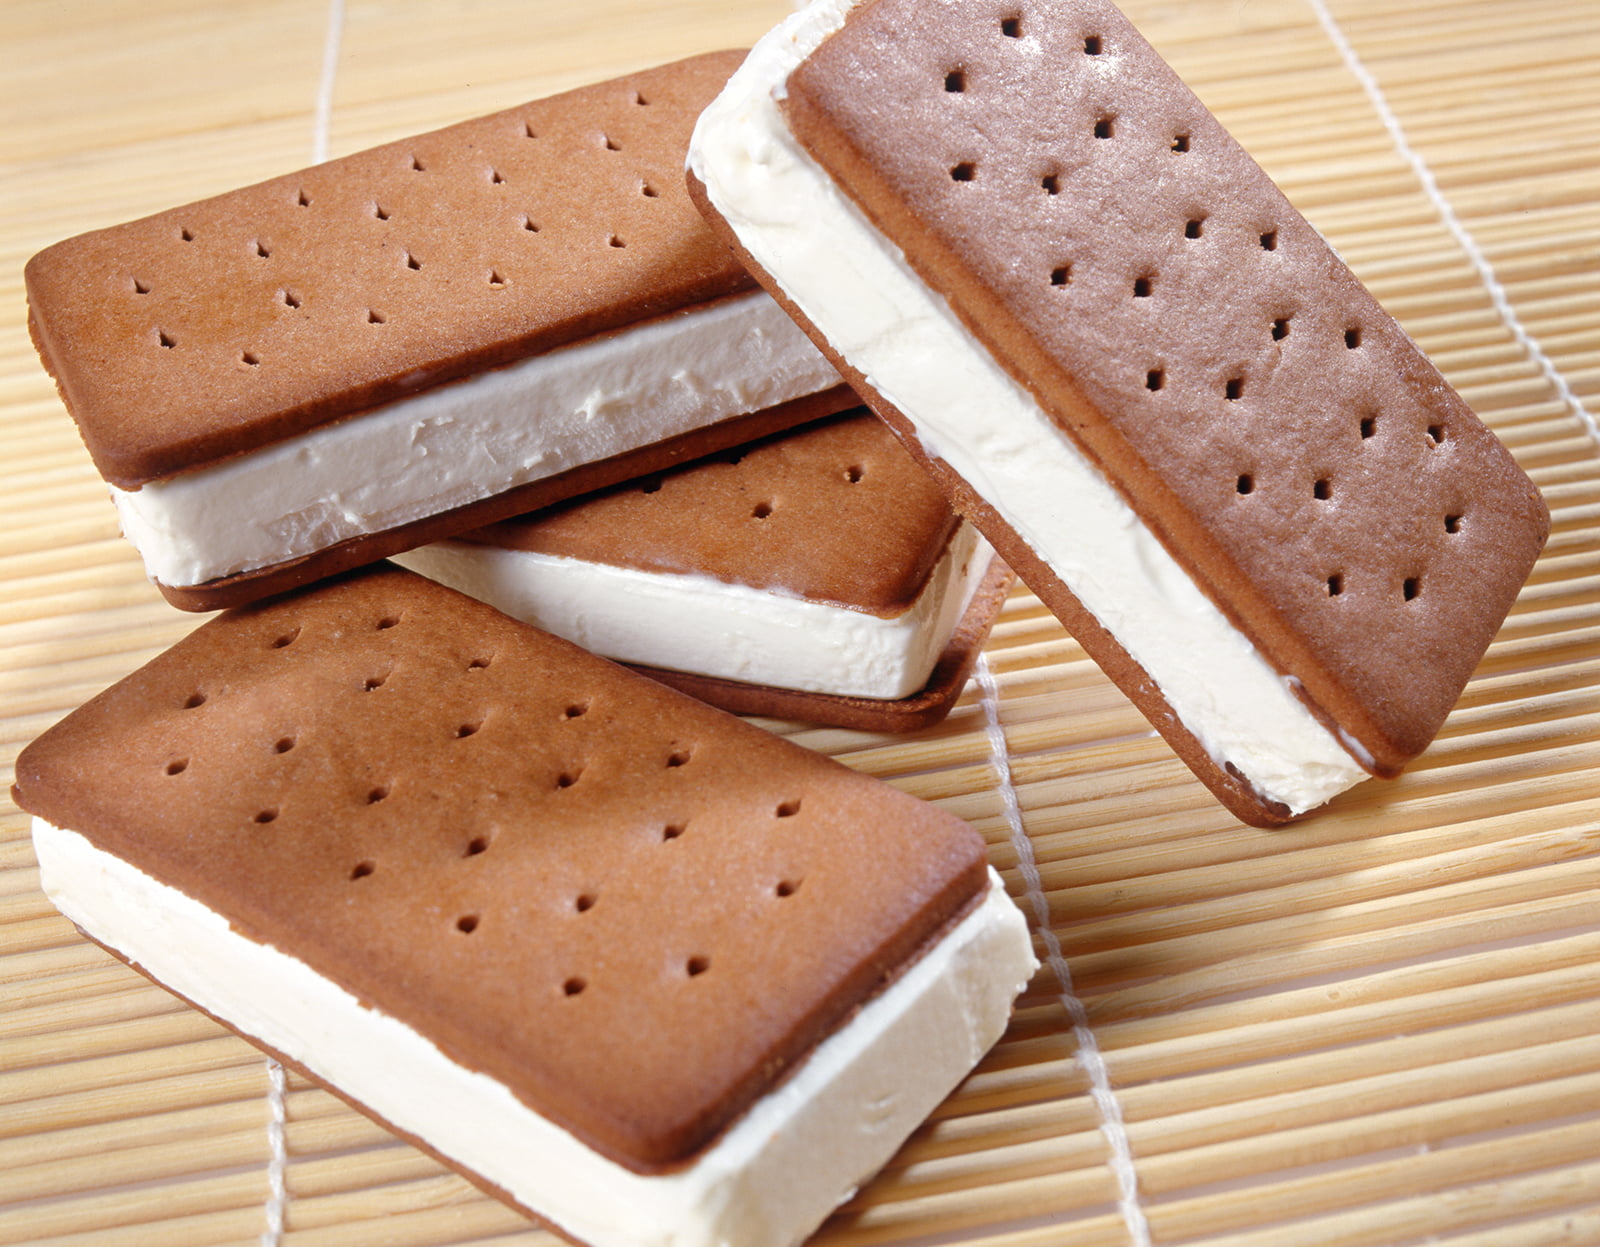 12 Facts About National Ice Cream Sandwich Day